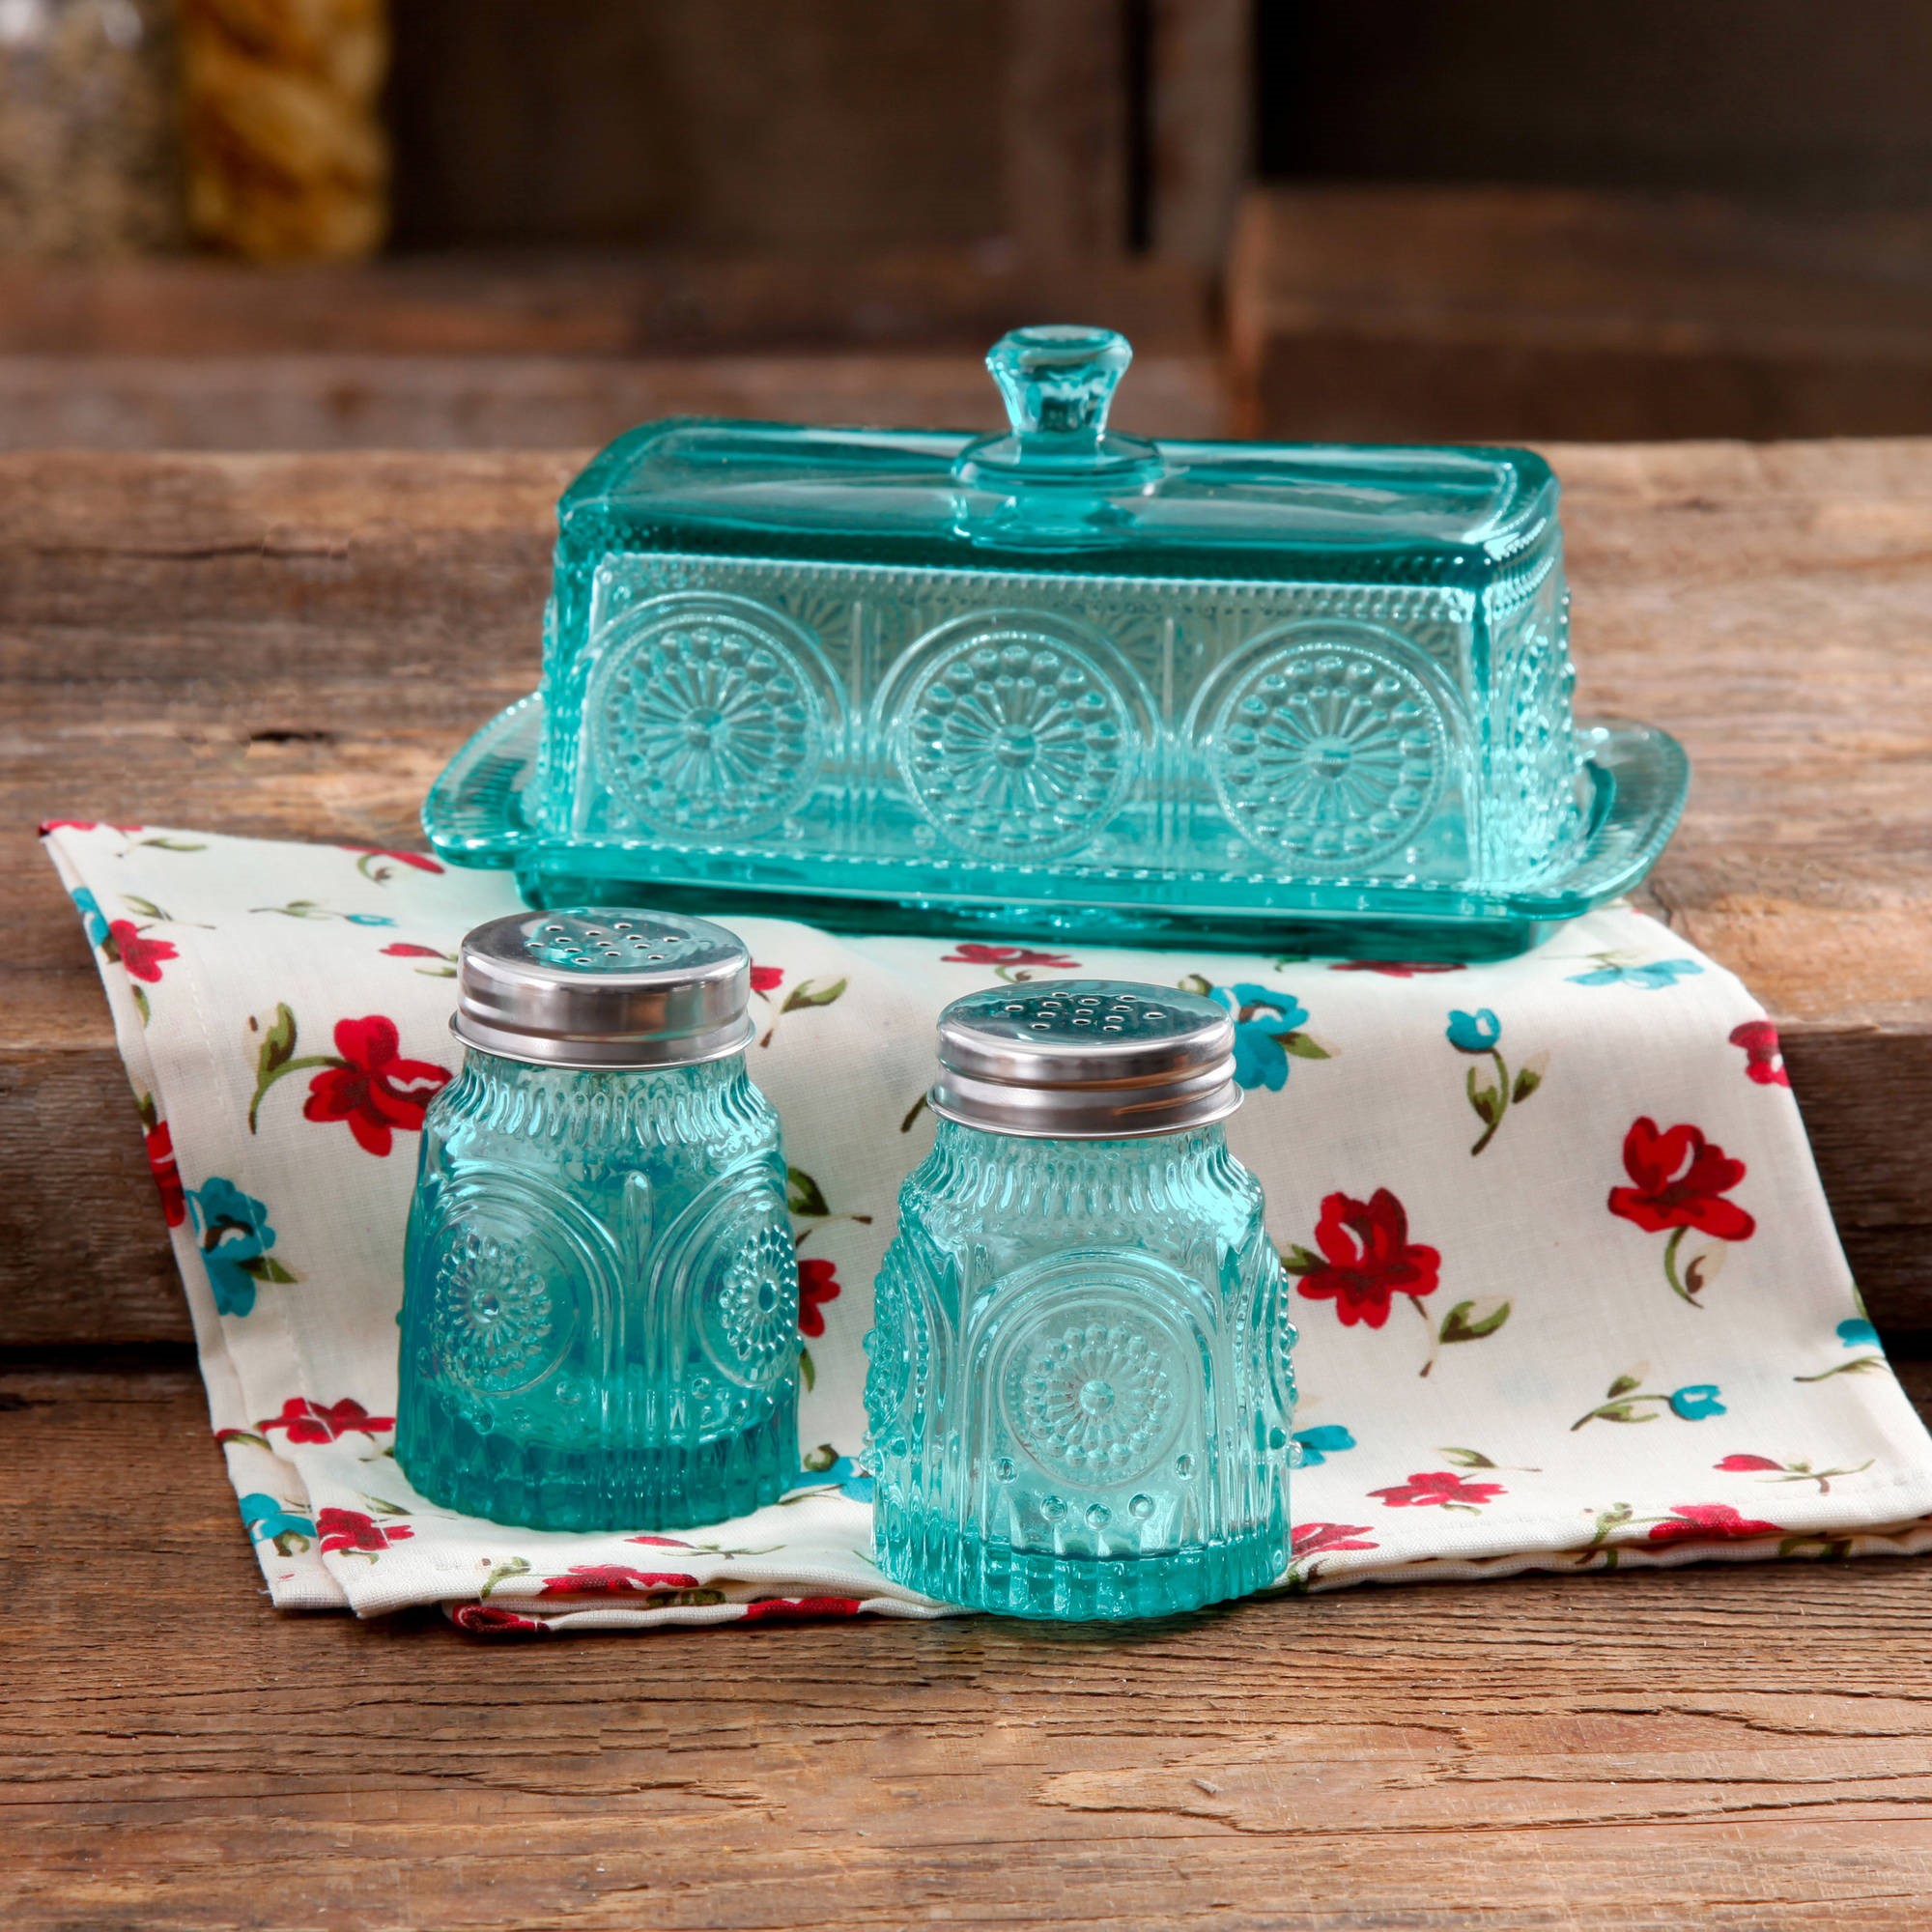 The Pioneer Woman Adeline Glass Butter Dish with Salt And Pepper Shaker Set - image 2 of 9